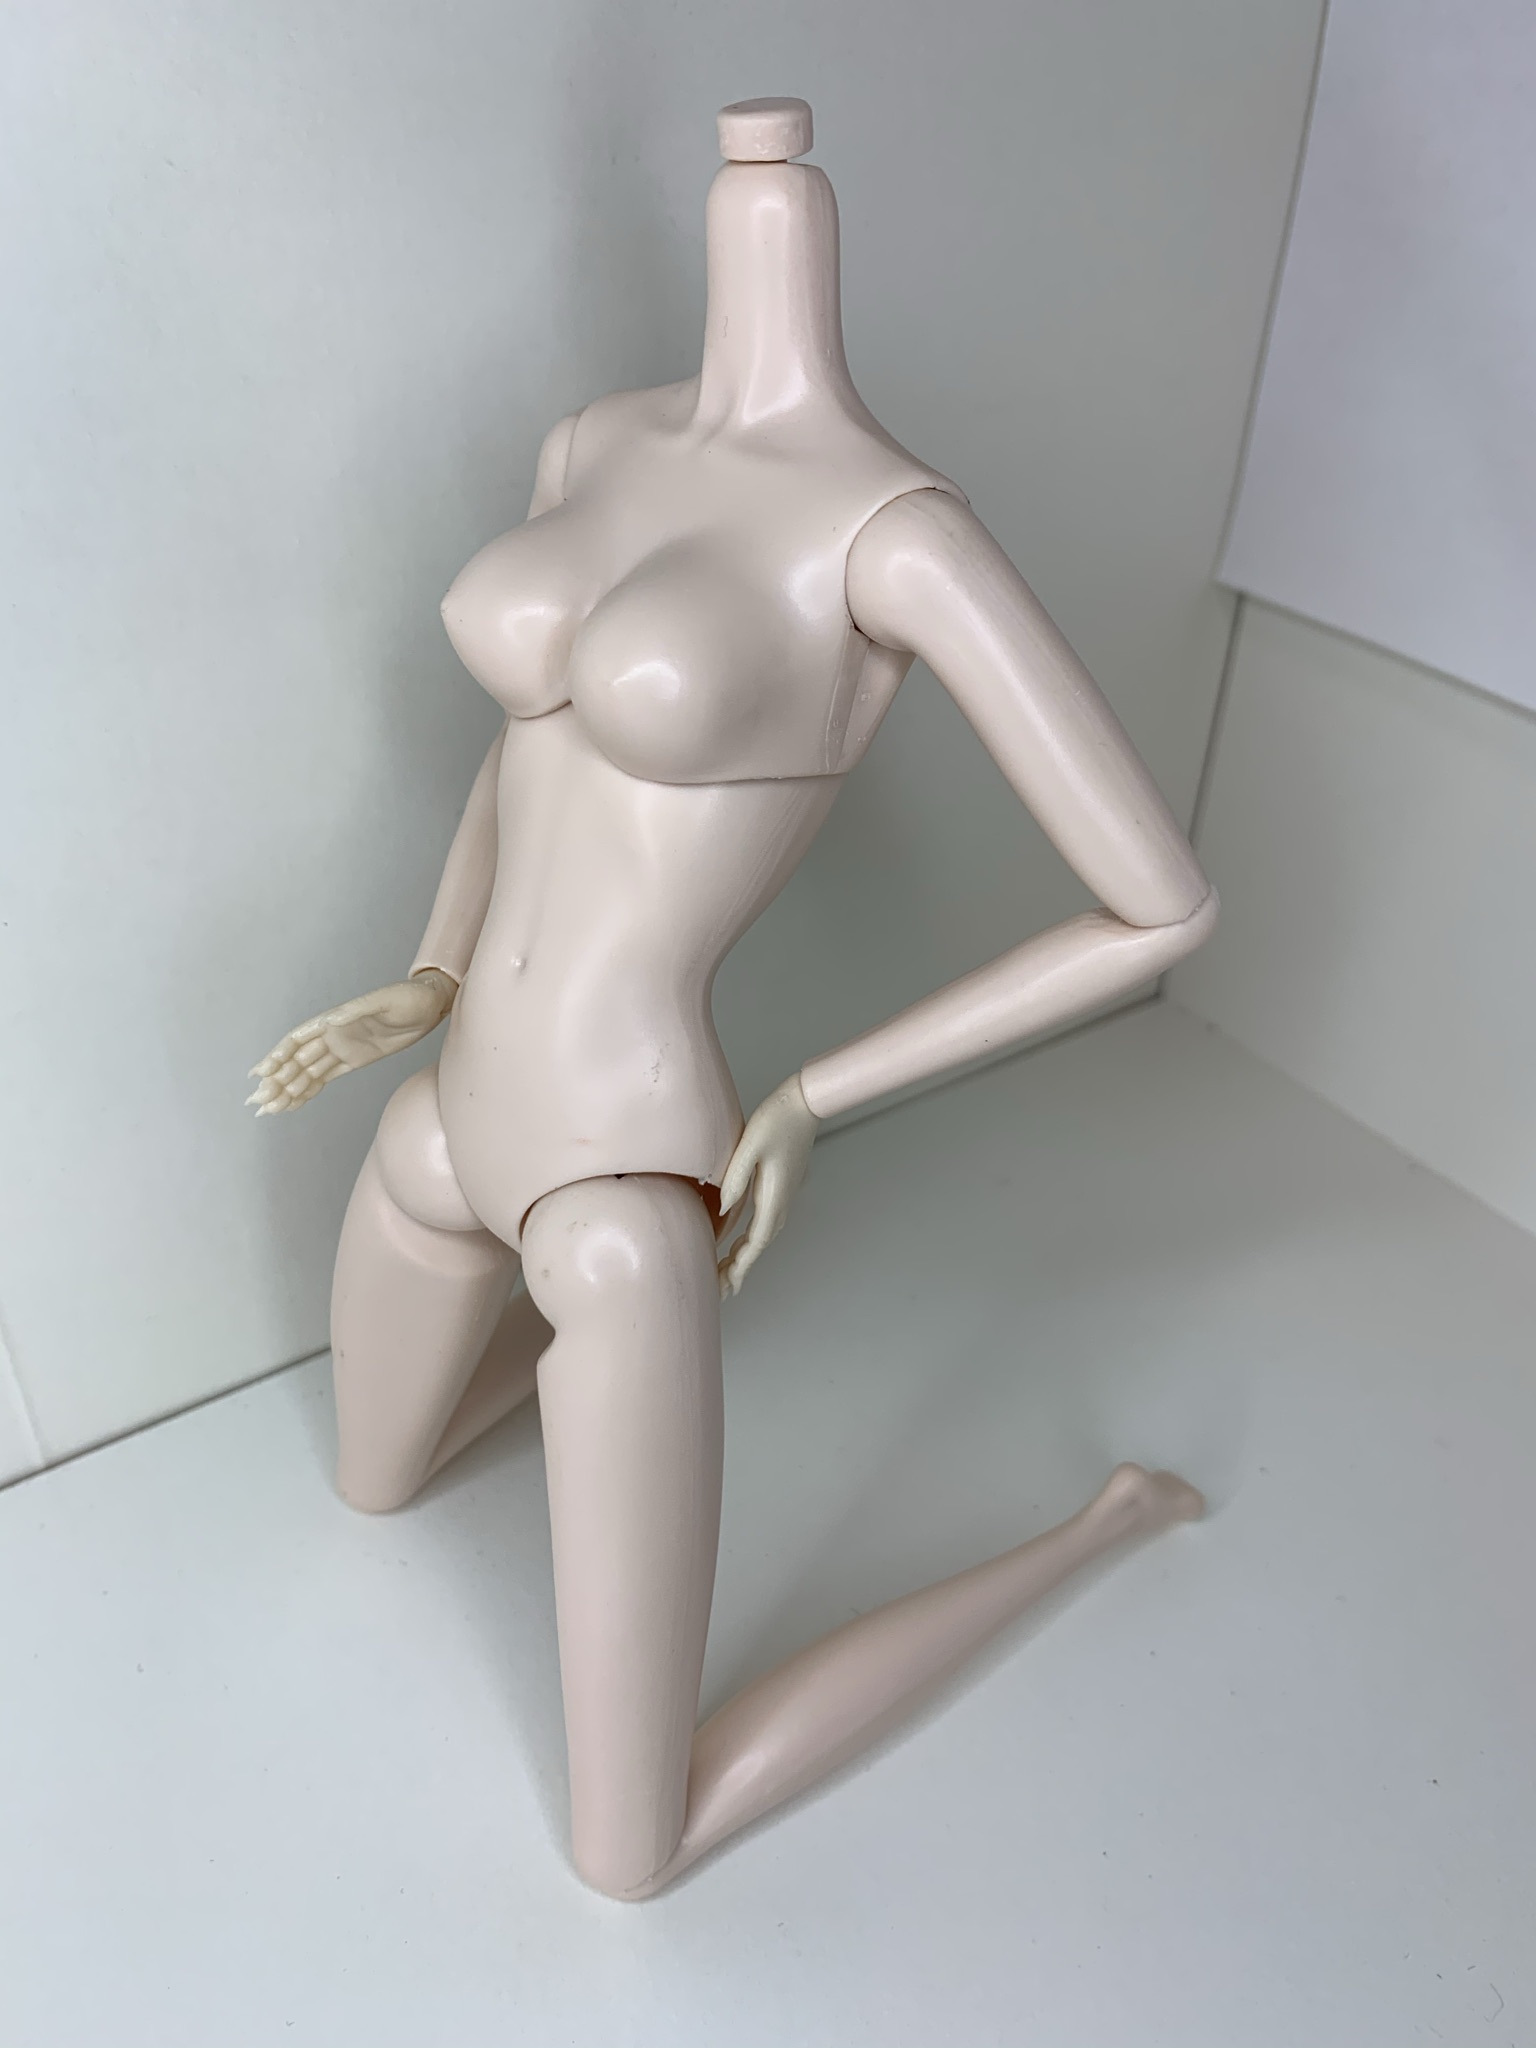 DIY OOAK Doll Bodies for Replacement 12 inch Fashion Doll Body Supermodel  Collector Doll Body Articulated Jointed Posable Doll Making Repair Caramel